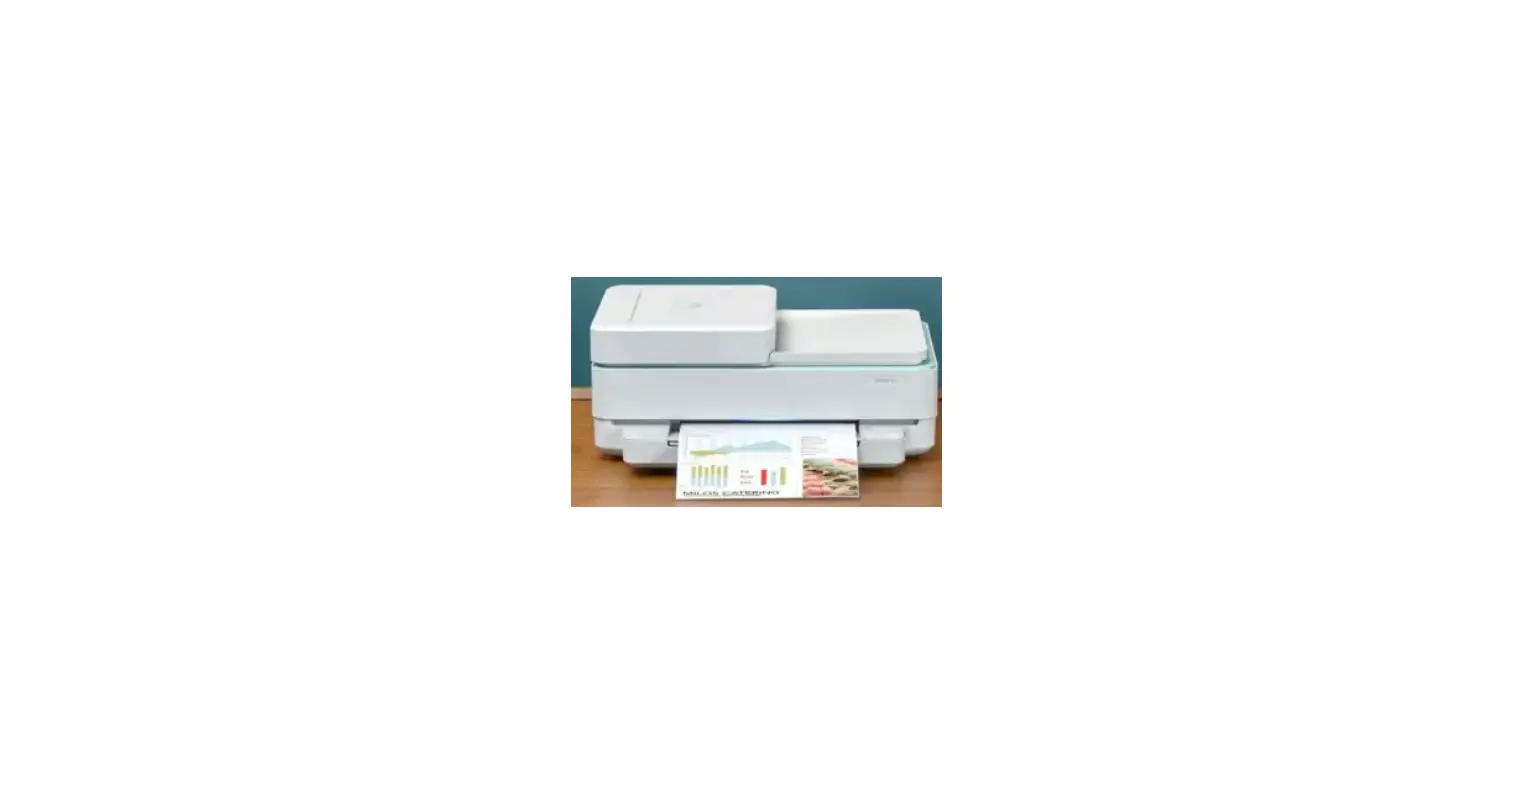 HP ENVY Pro All-in-One Photo Printer [6020, 6420, 5020 ....] Catalog - Manualsee